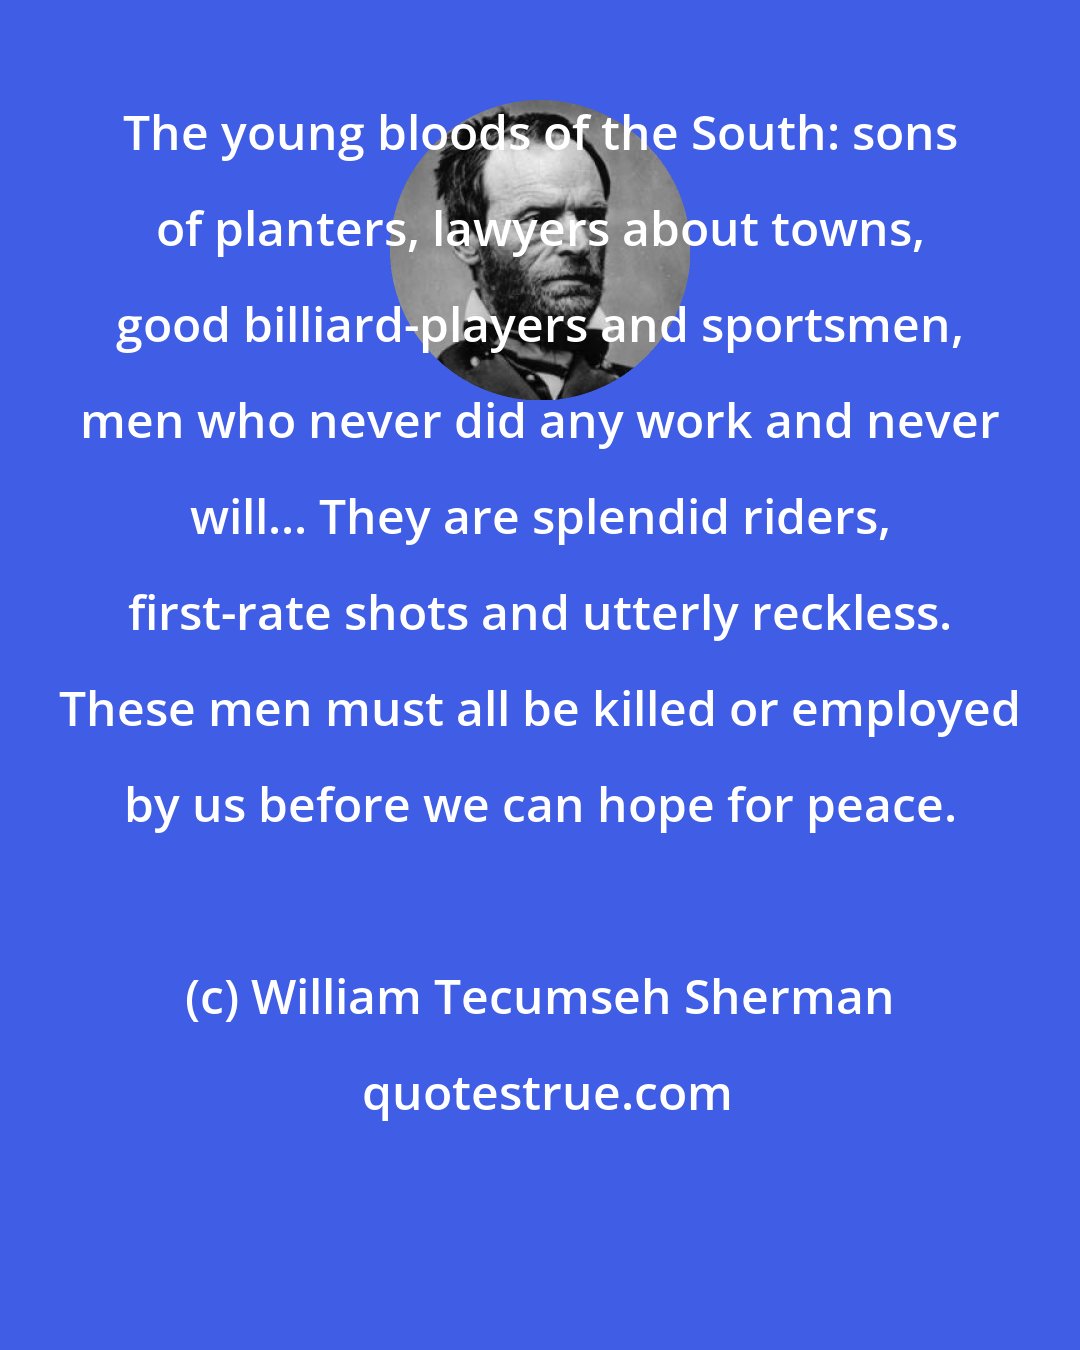 William Tecumseh Sherman: The young bloods of the South: sons of planters, lawyers about towns, good billiard-players and sportsmen, men who never did any work and never will... They are splendid riders, first-rate shots and utterly reckless. These men must all be killed or employed by us before we can hope for peace.